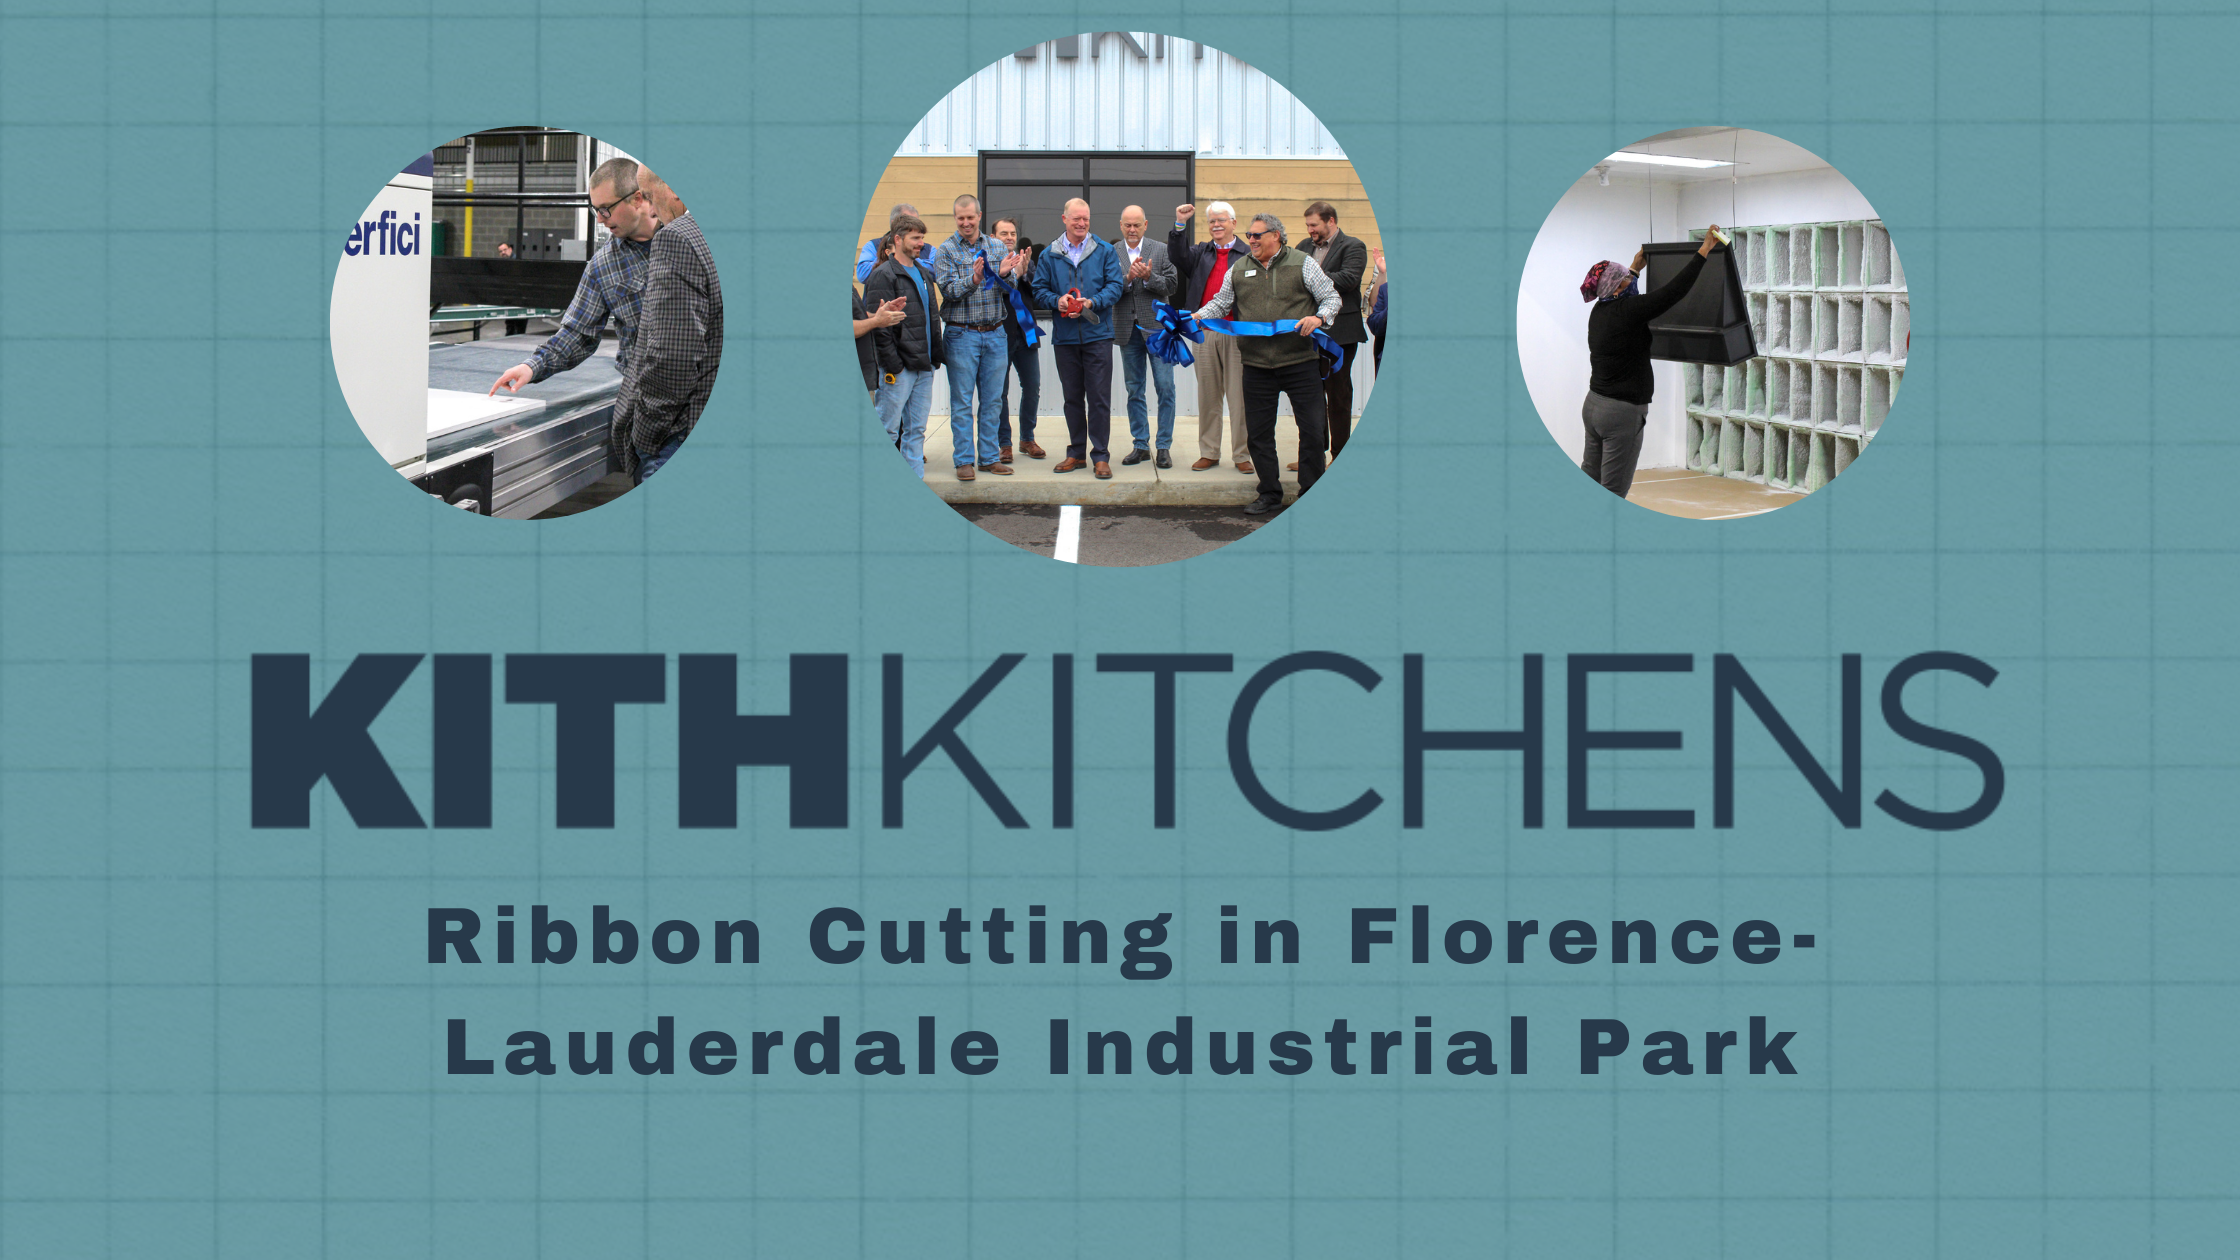 Kith Kitchens Ribbon Cutting In